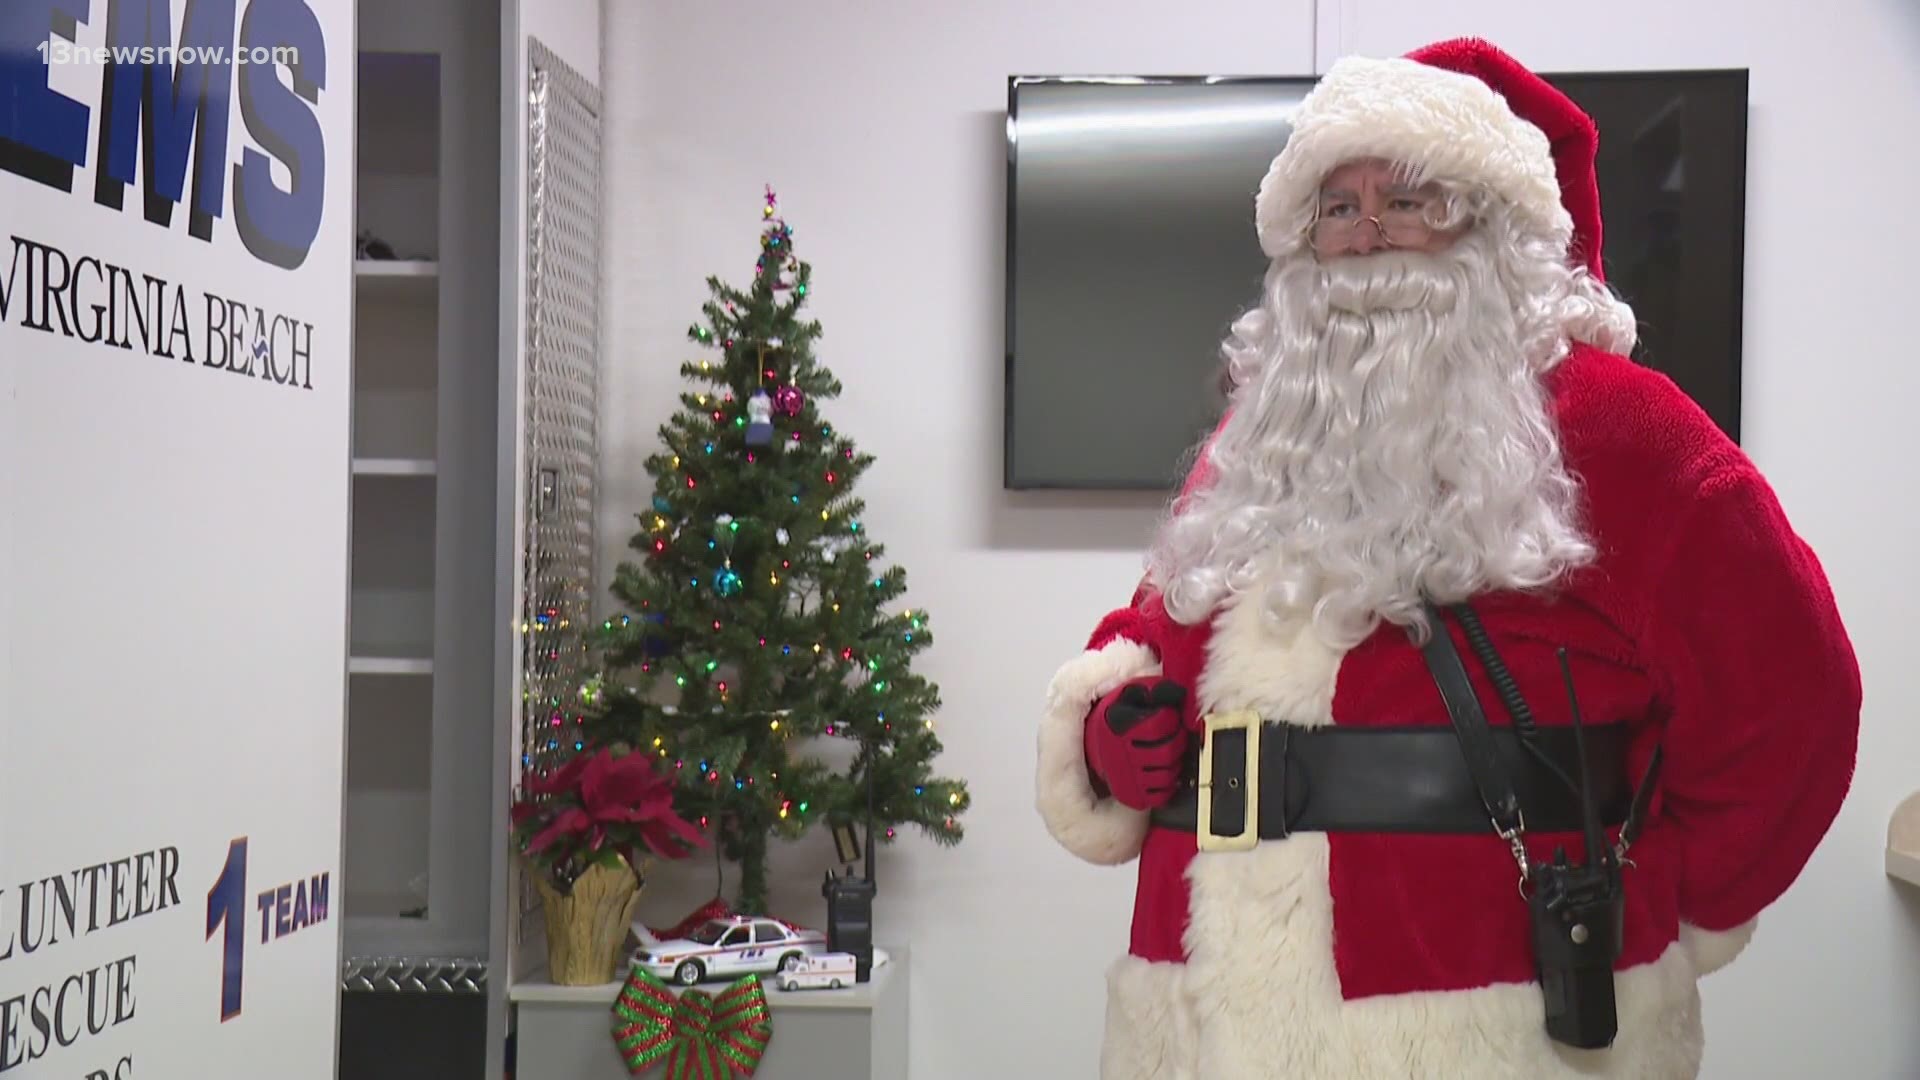 Virginia Beach EMS had Santa go live on the radio to share an important message with local children, reminding them of the true meaning of Christmas.